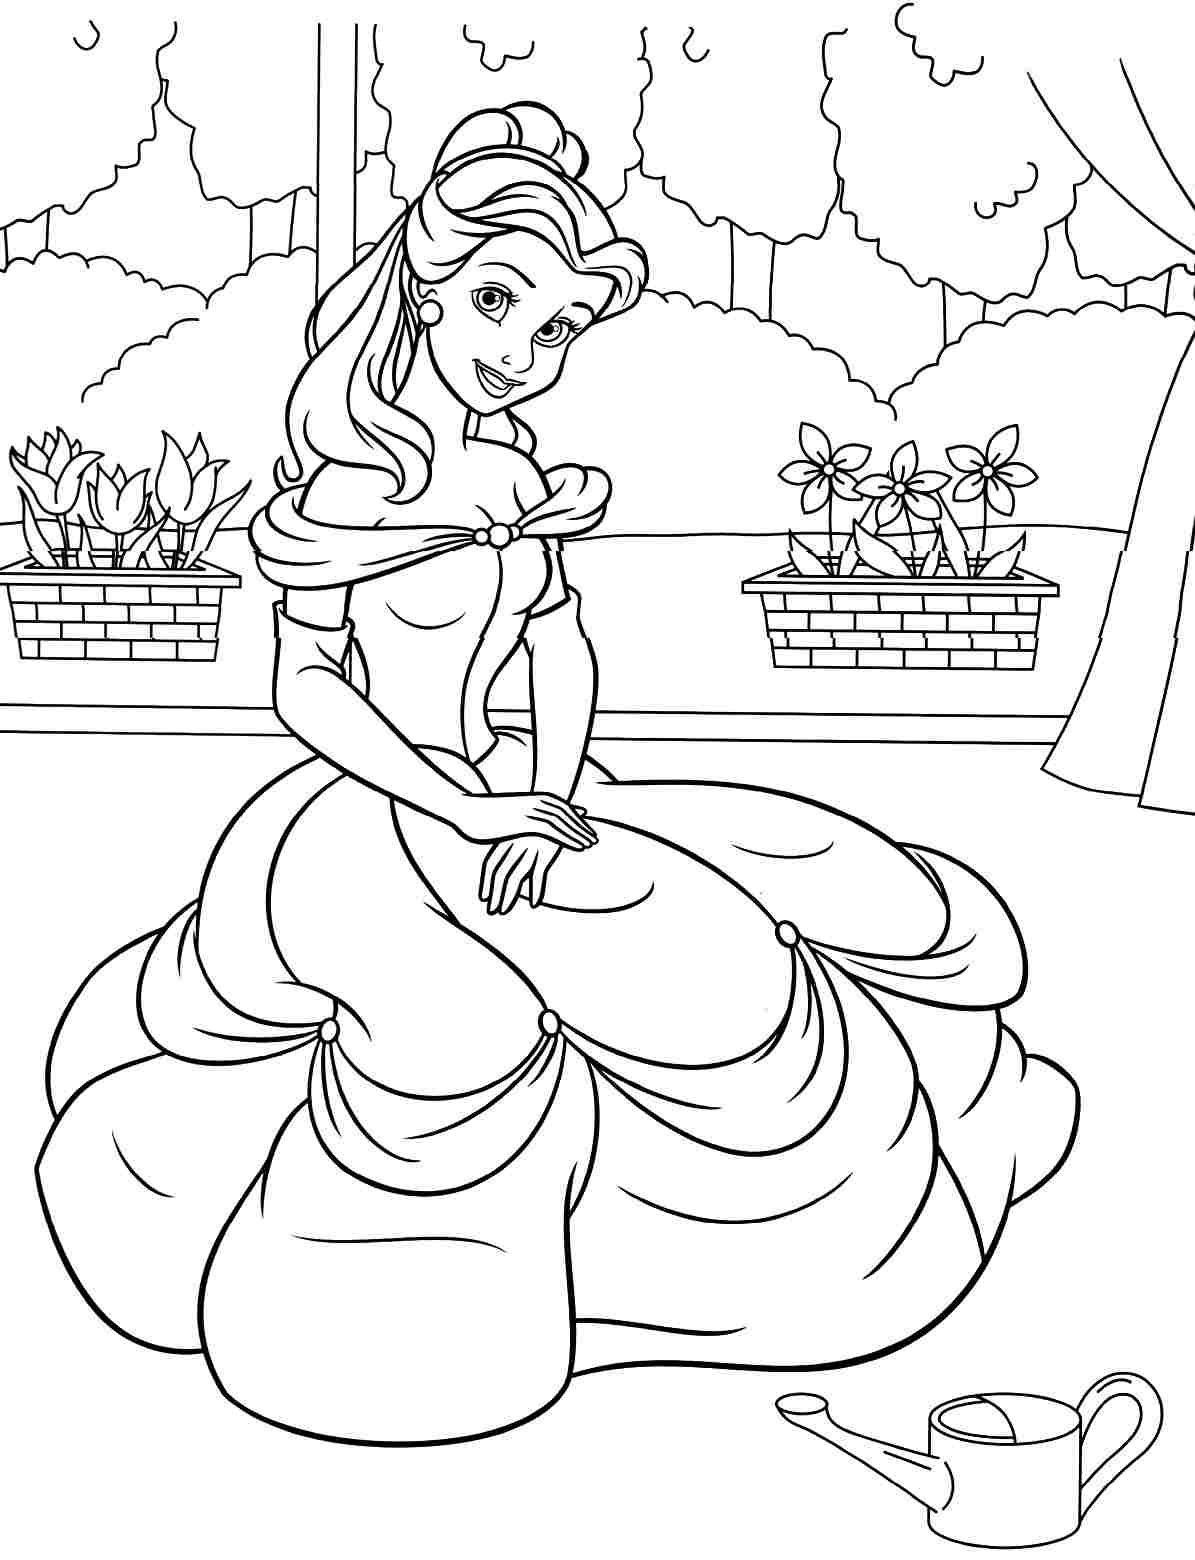 Coloring Pages For Girls Disney Princess
 Disney Princess Belle Coloring Pages For Girls